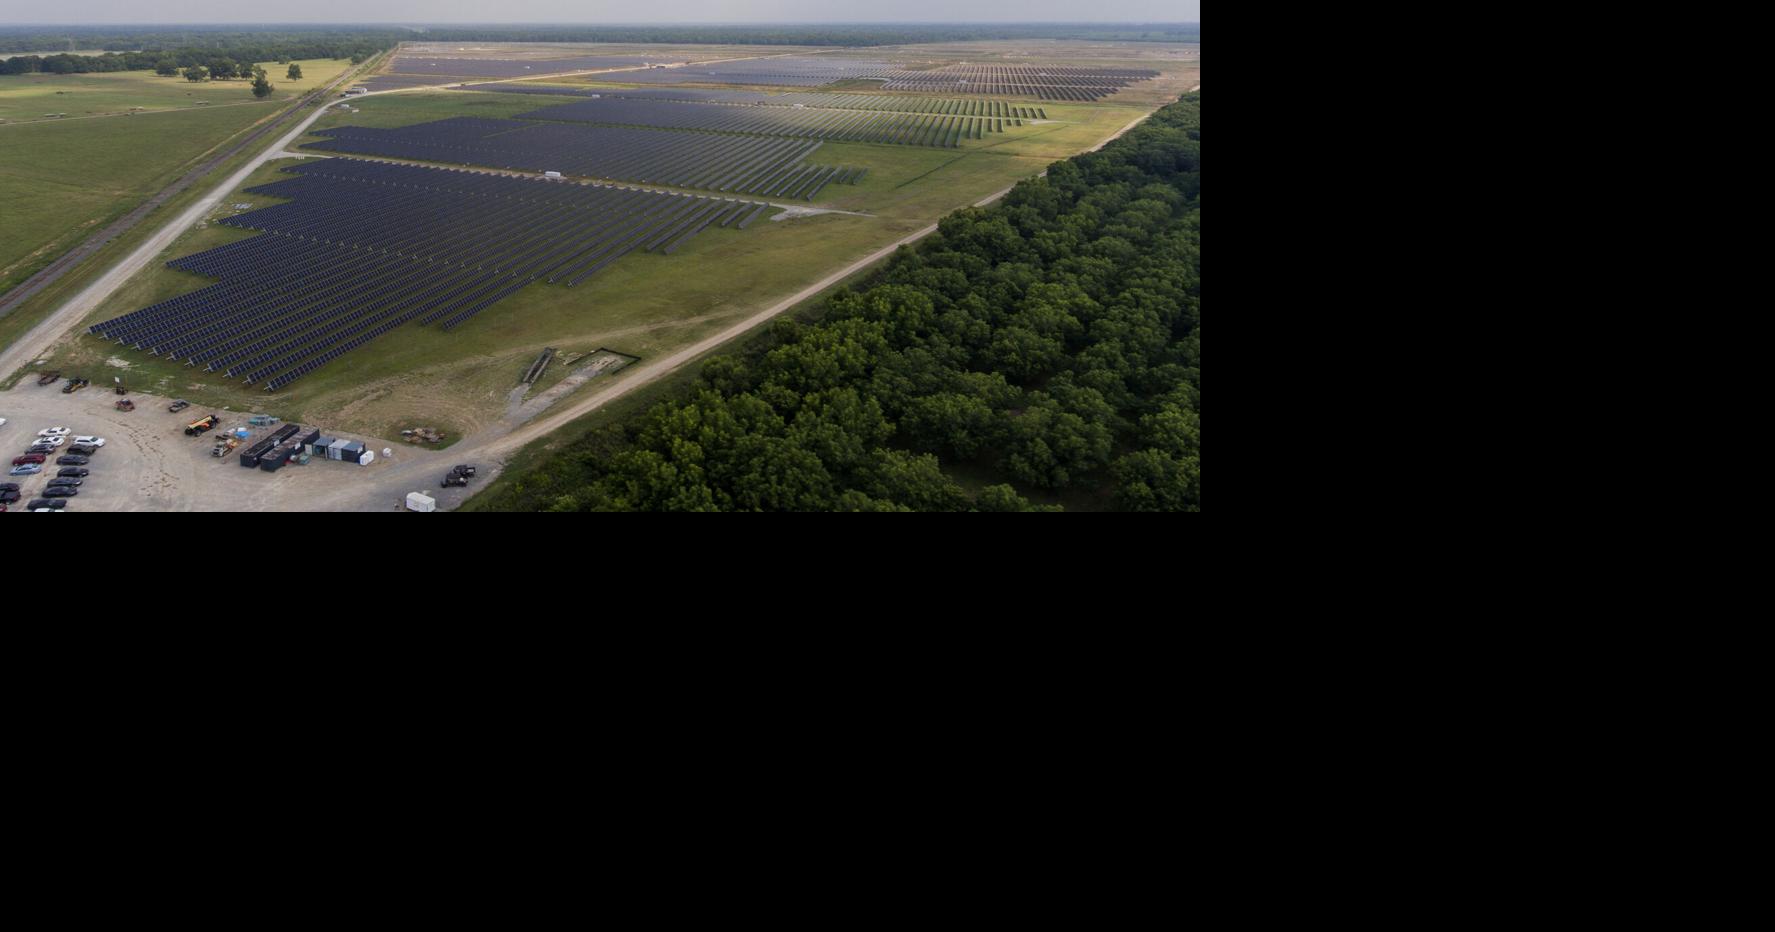 ‘You’re not wanted here’: Proposed south Louisiana solar farm faces backlash at packed meeting